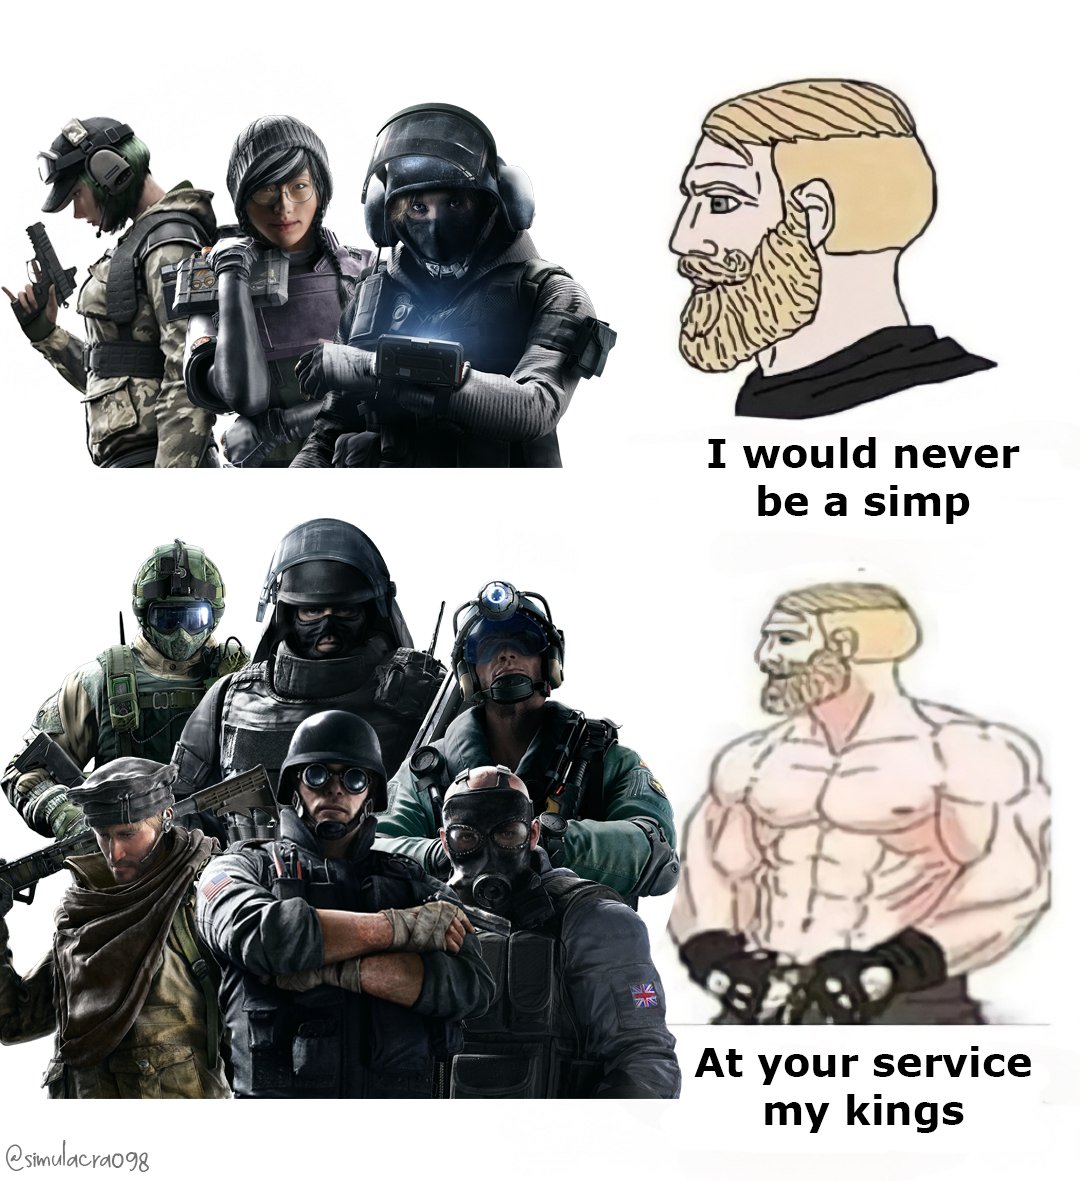 No denying it here, nothing but the truth #R6Community #RainbowSixSiege #R6S #WeR6community